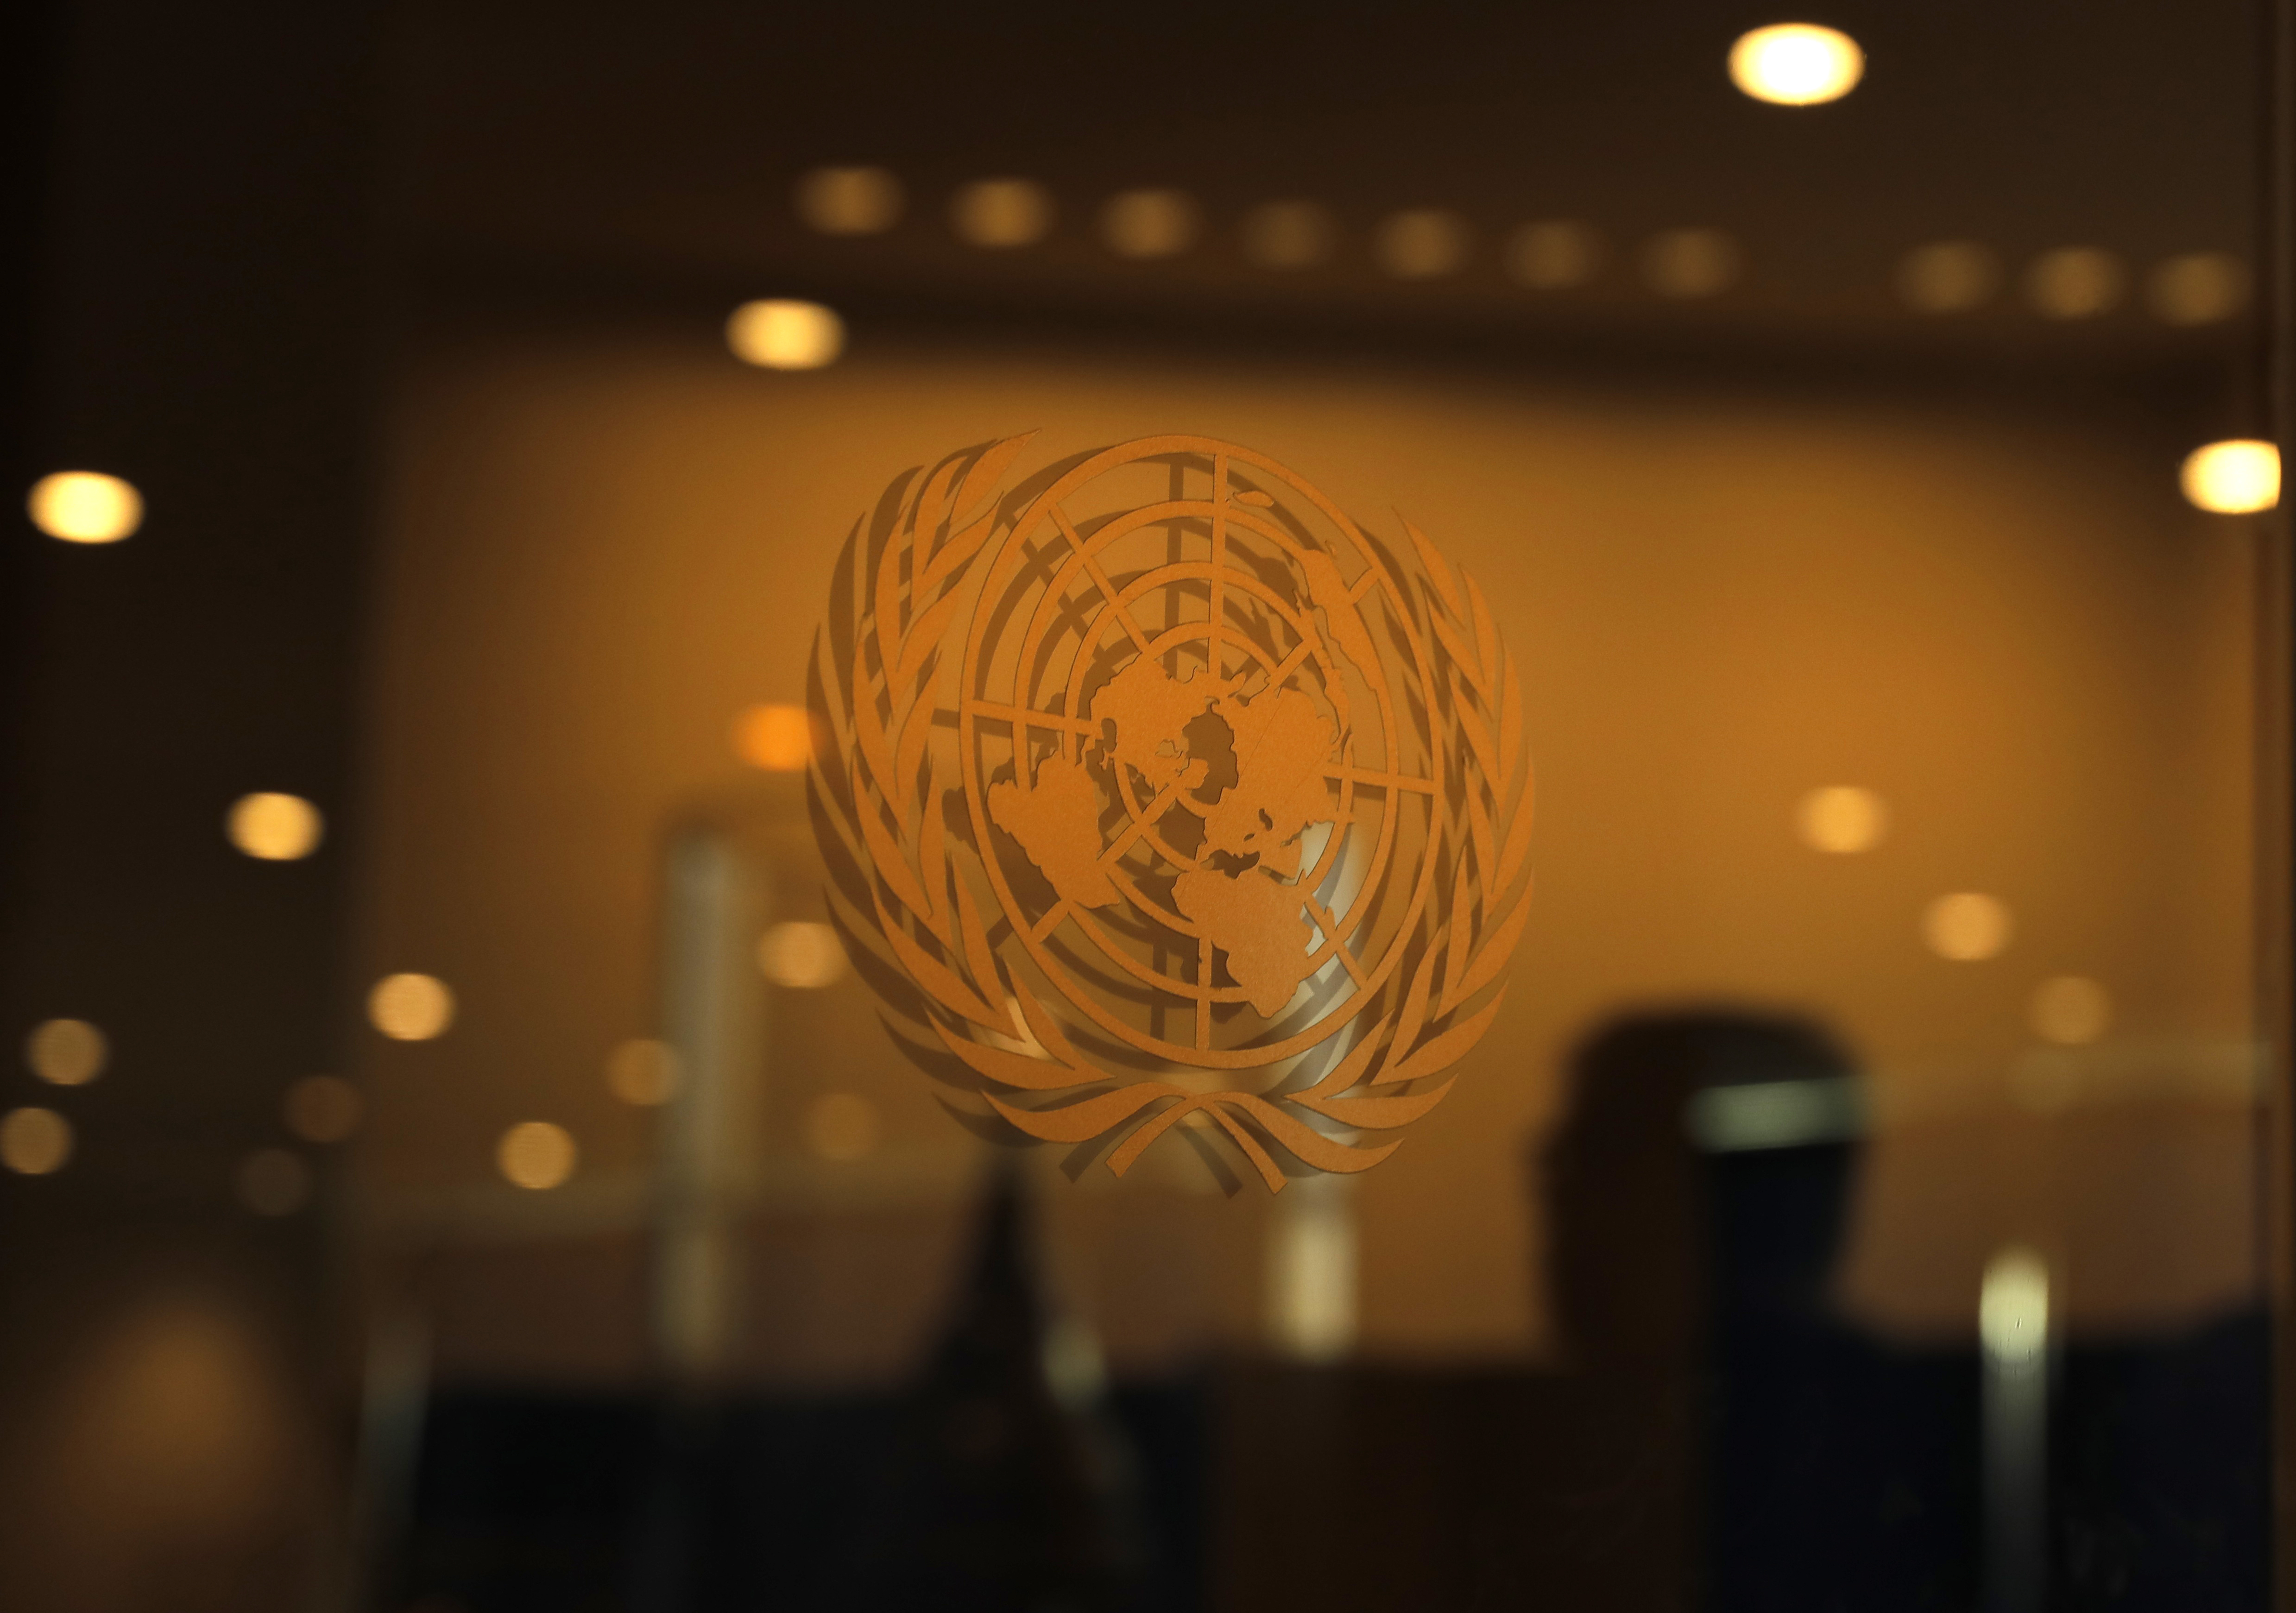 The United Nations logo is seen during the 2019 United Nations Climate Action Summit at U.N. headquarters in New York City, New York, U.S.